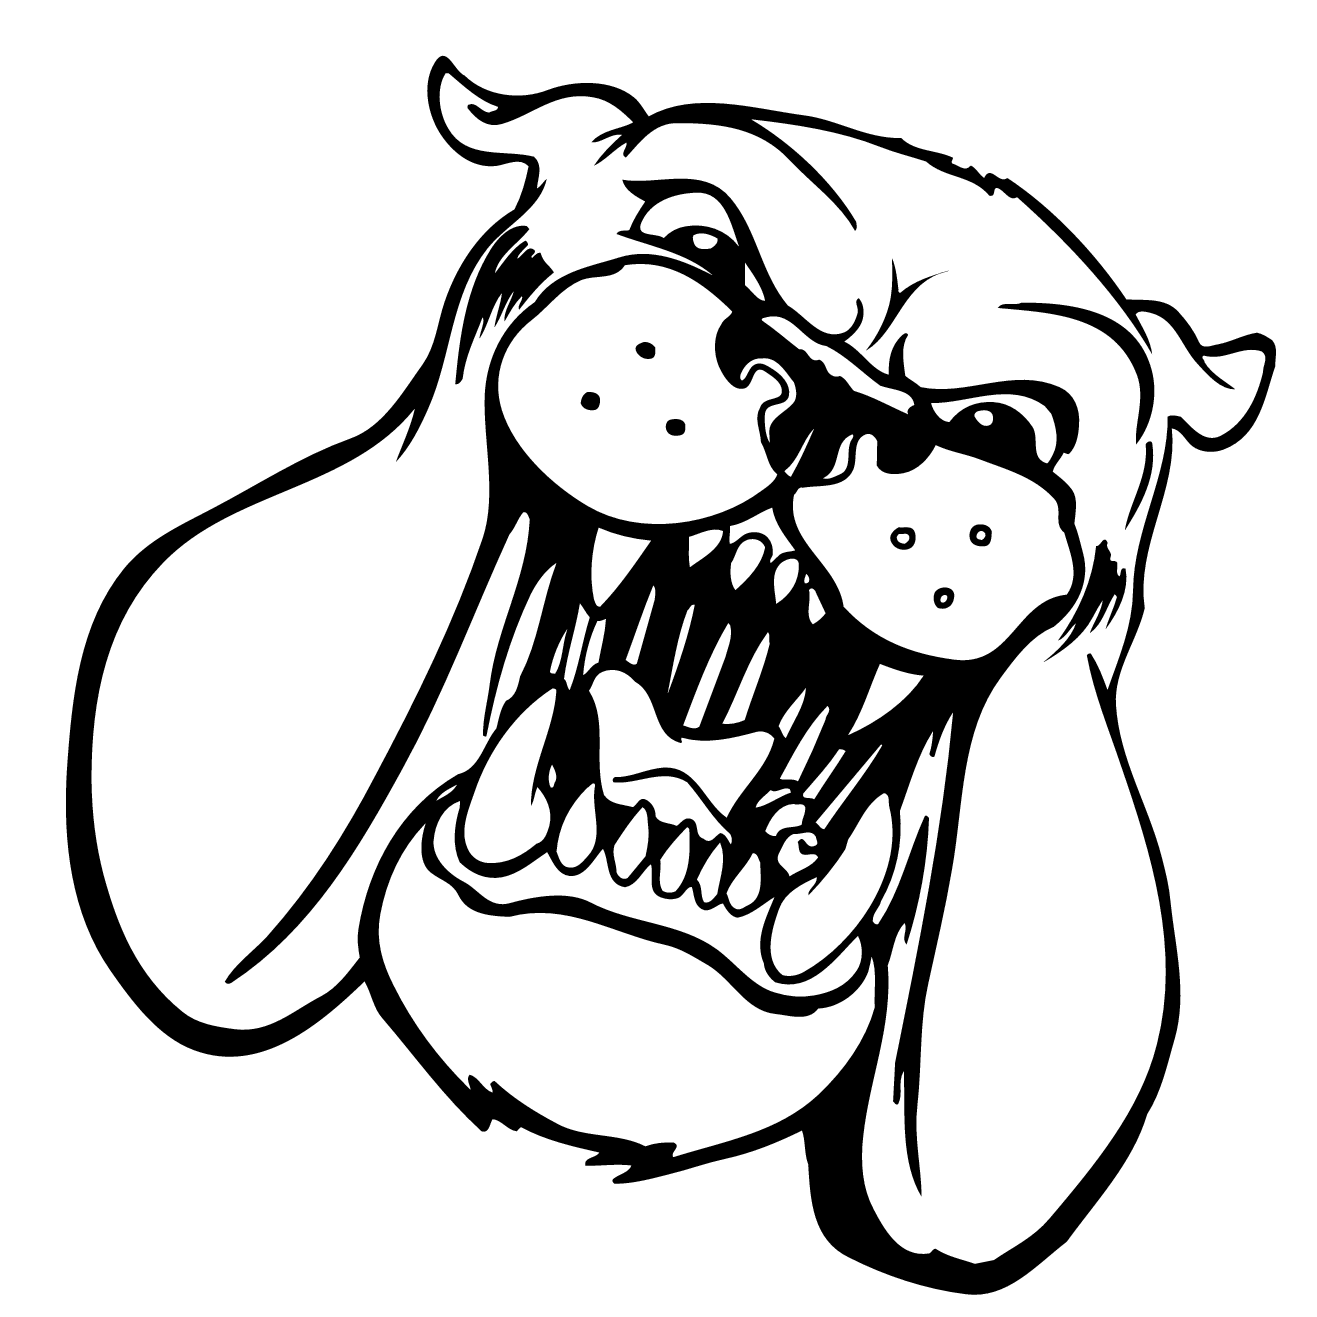 Bulldog Black And White Images Hd Image Clipart